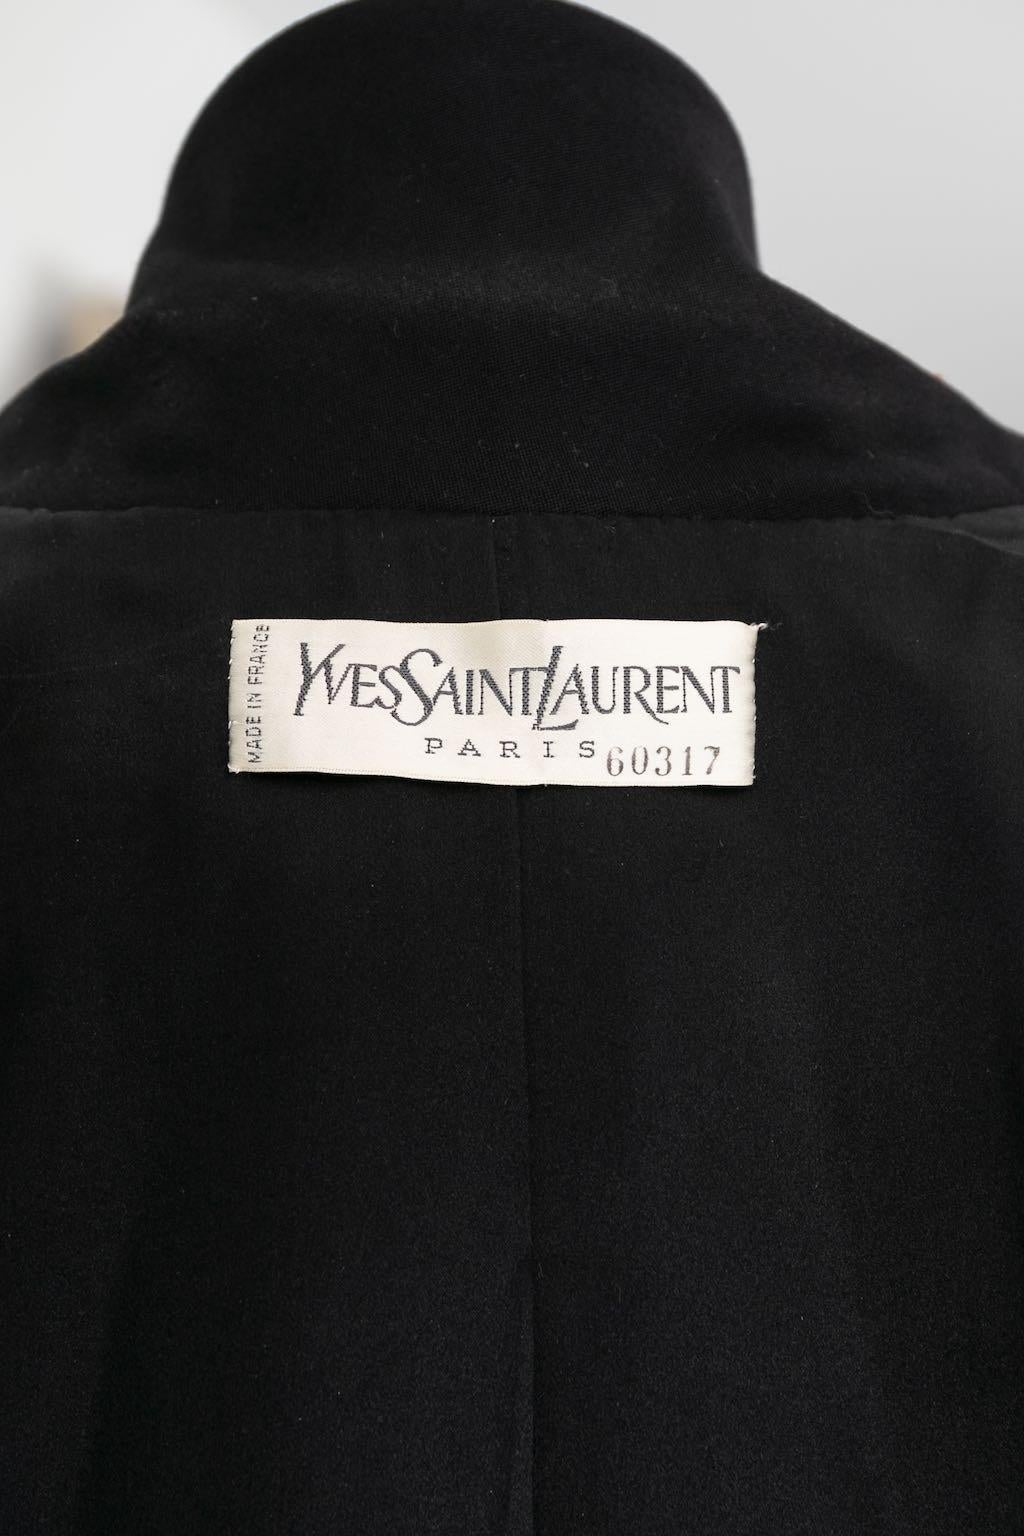 Yves Saint Laurent Haute Couture Black Skirt and Jacket Set, circa 1981/1982 For Sale 2